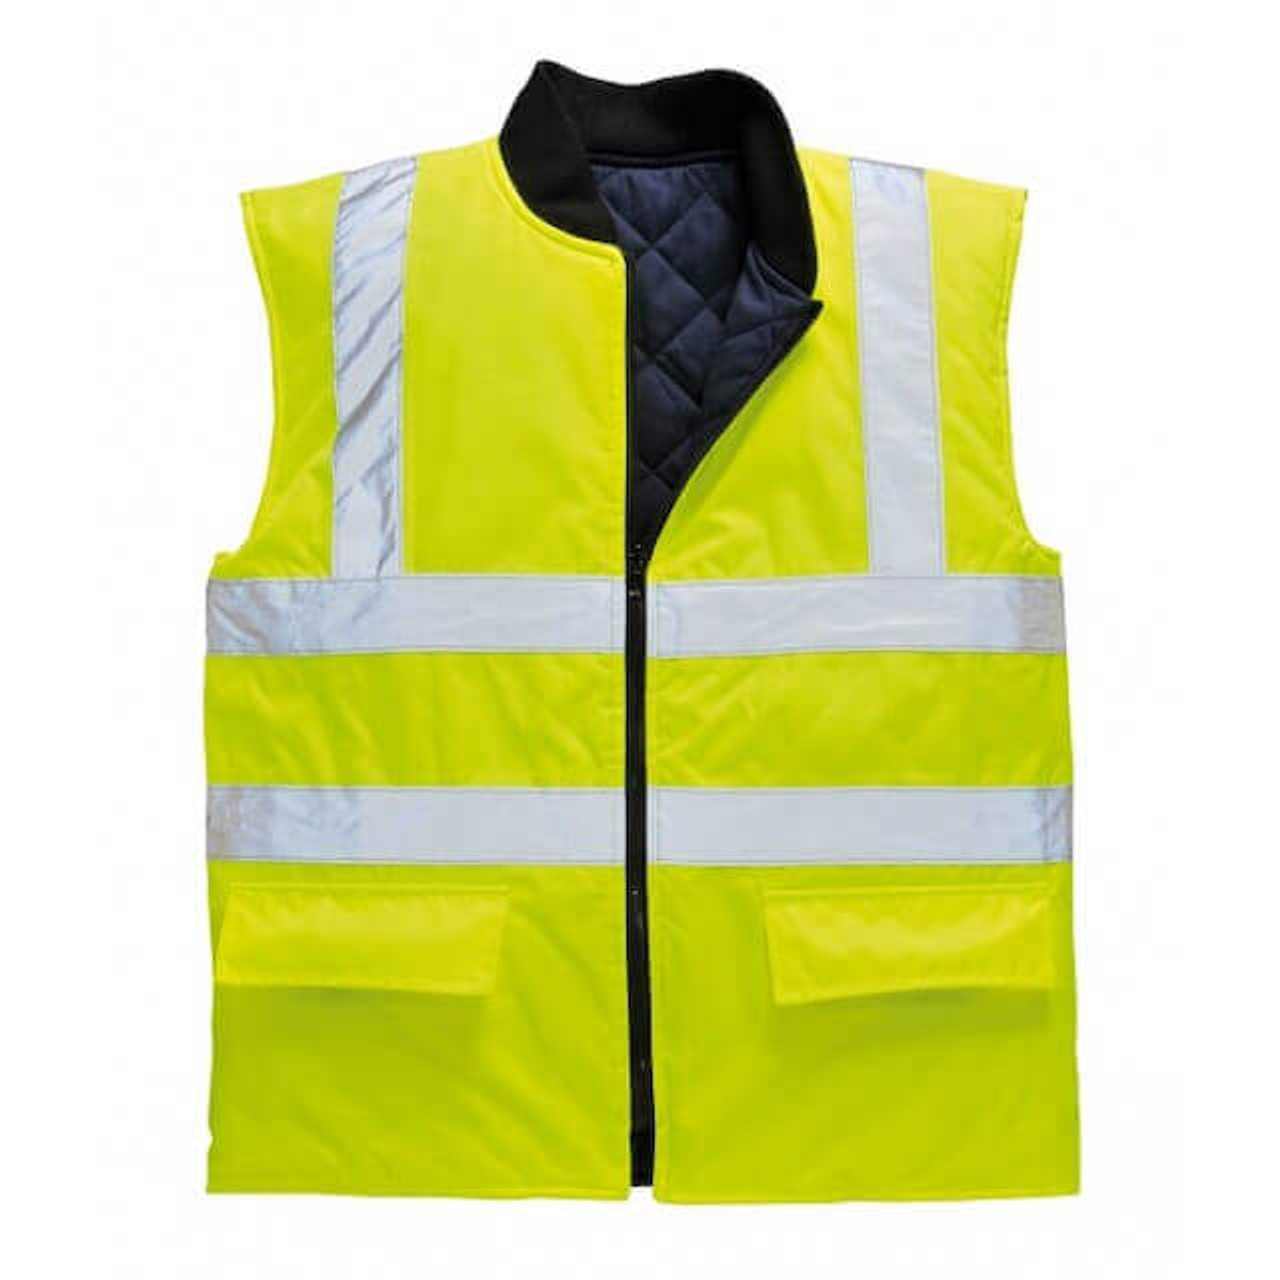 https://cdn11.bigcommerce.com/s-eokud1lf5m/images/stencil/1280x1280/products/1219/5008/bodywarmer-quilted-safety-vest-yellow__72309.1674148528.jpg?c=1